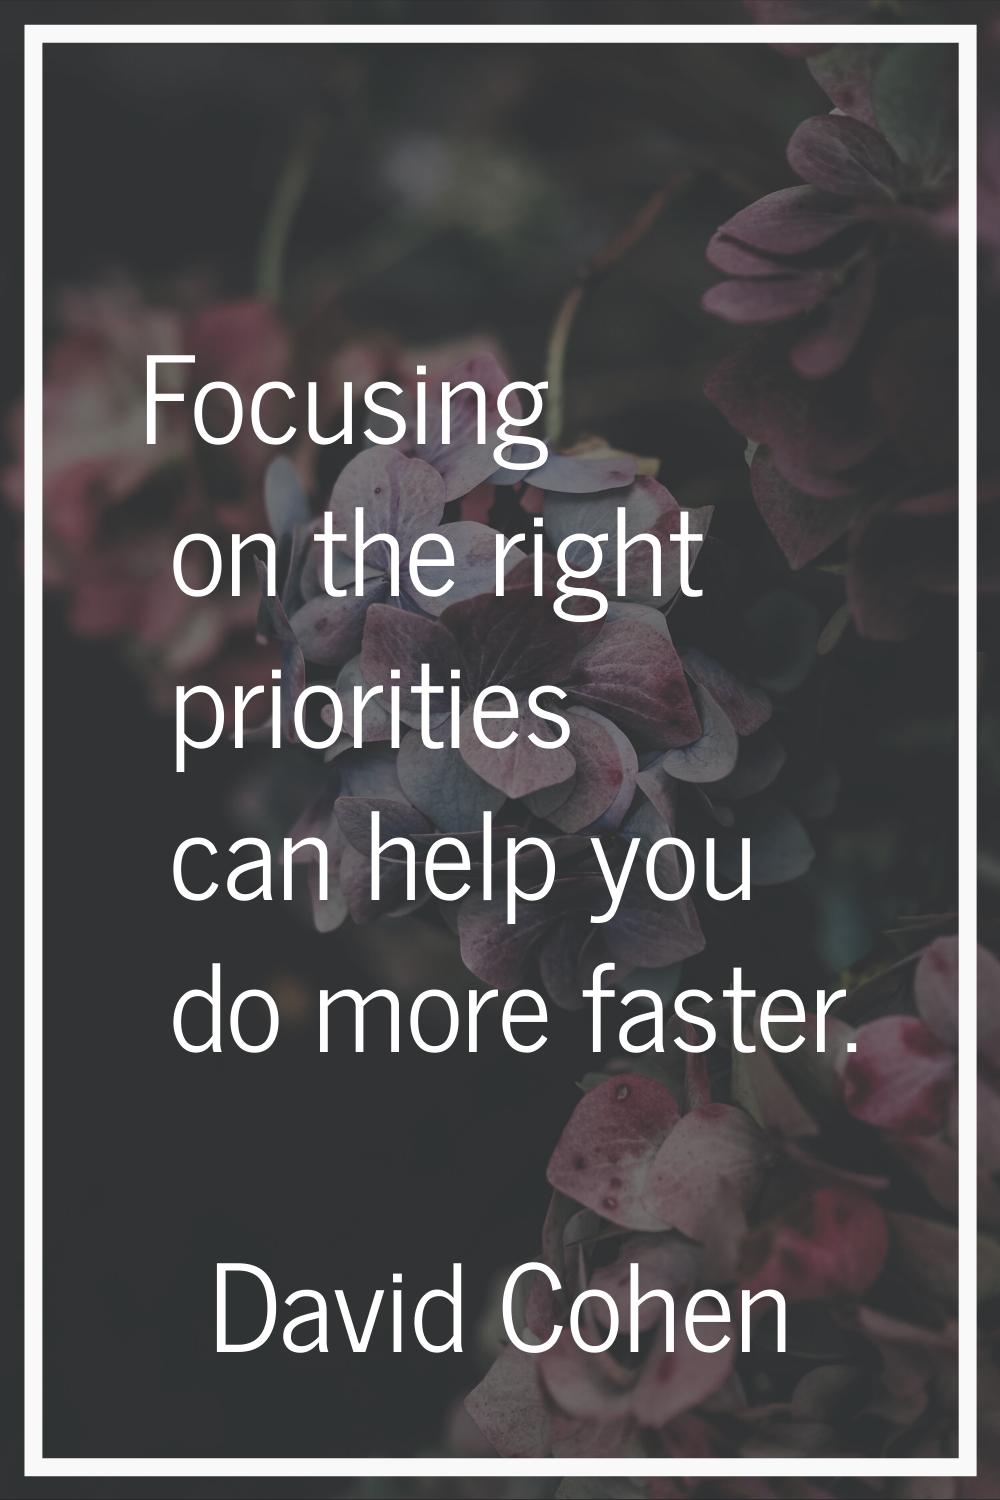 Focusing on the right priorities can help you do more faster.